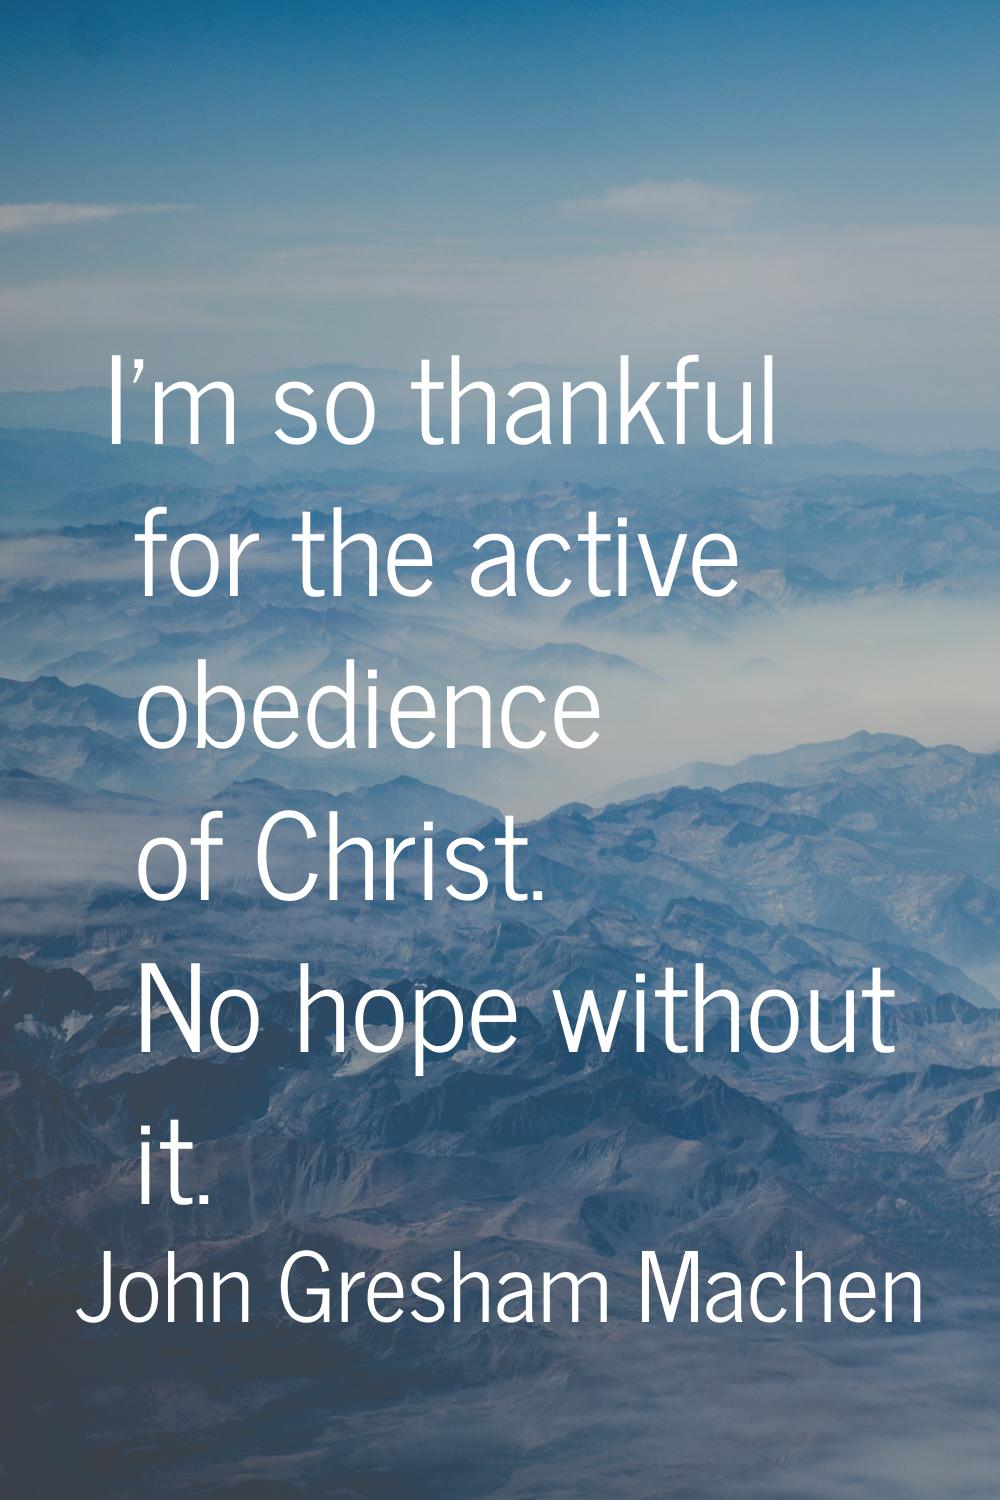 I'm so thankful for the active obedience of Christ. No hope without it.